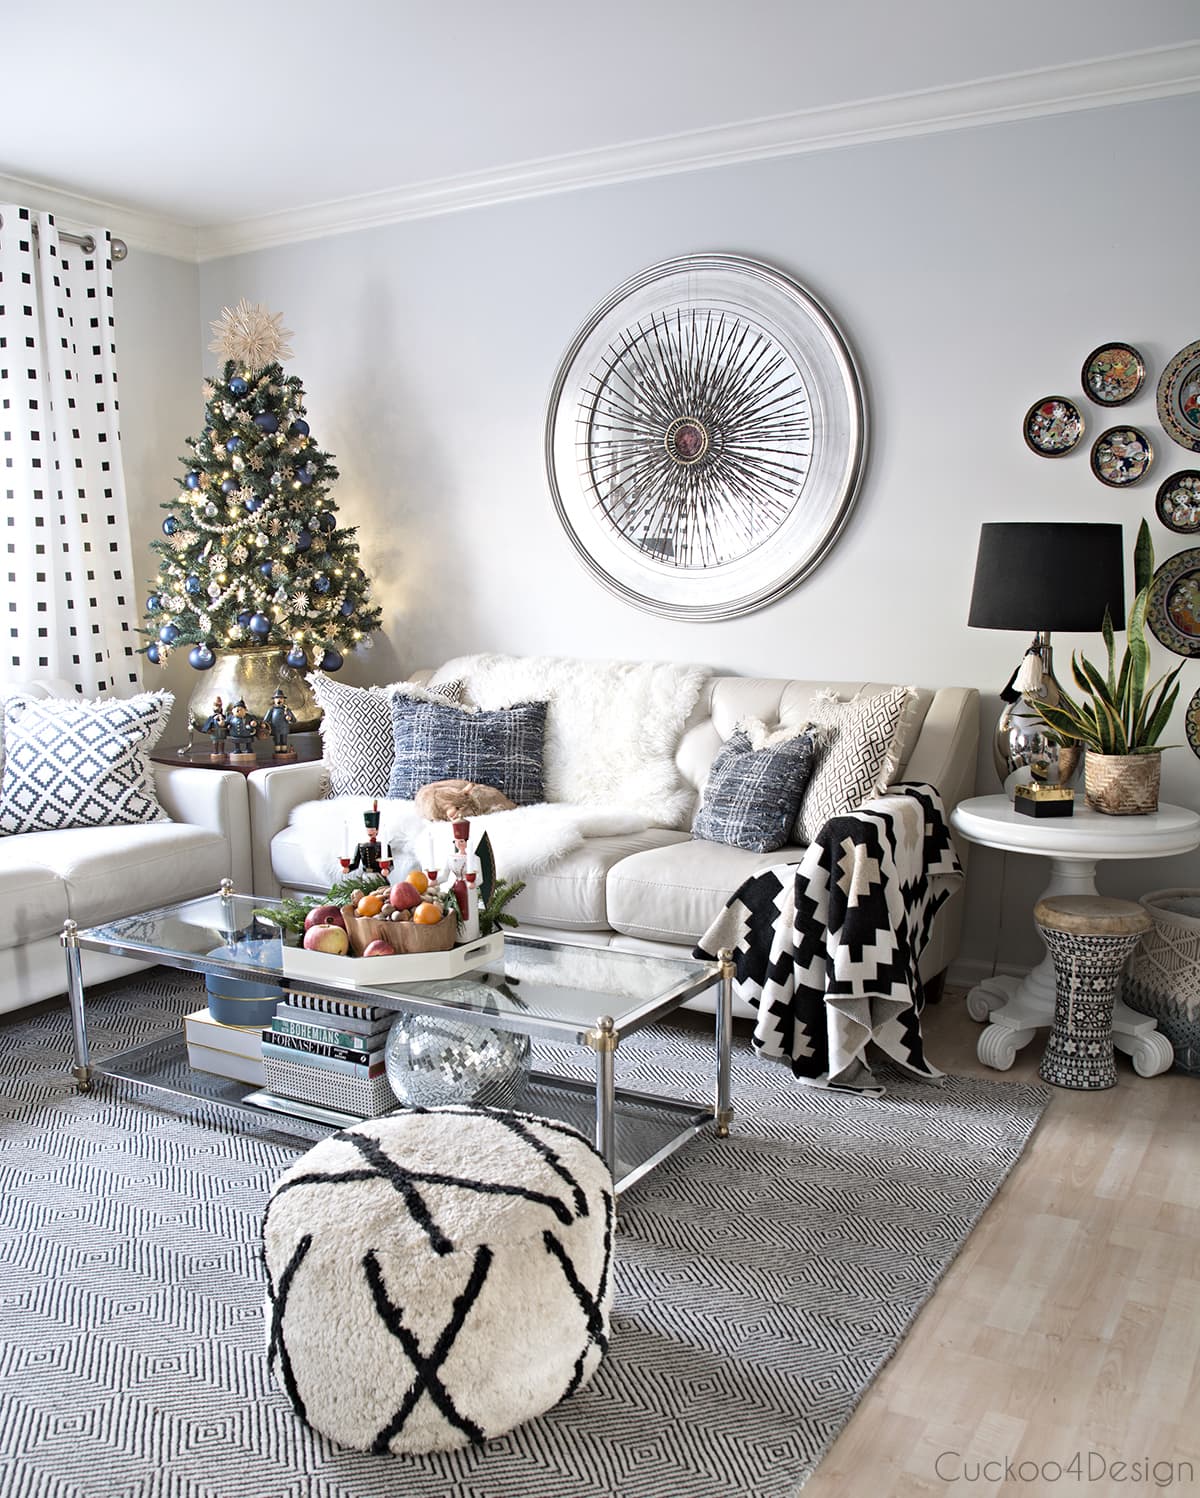 modern take on traditional European/German Christmas decor with lots of traditional German decor pieces and modern black and white accents